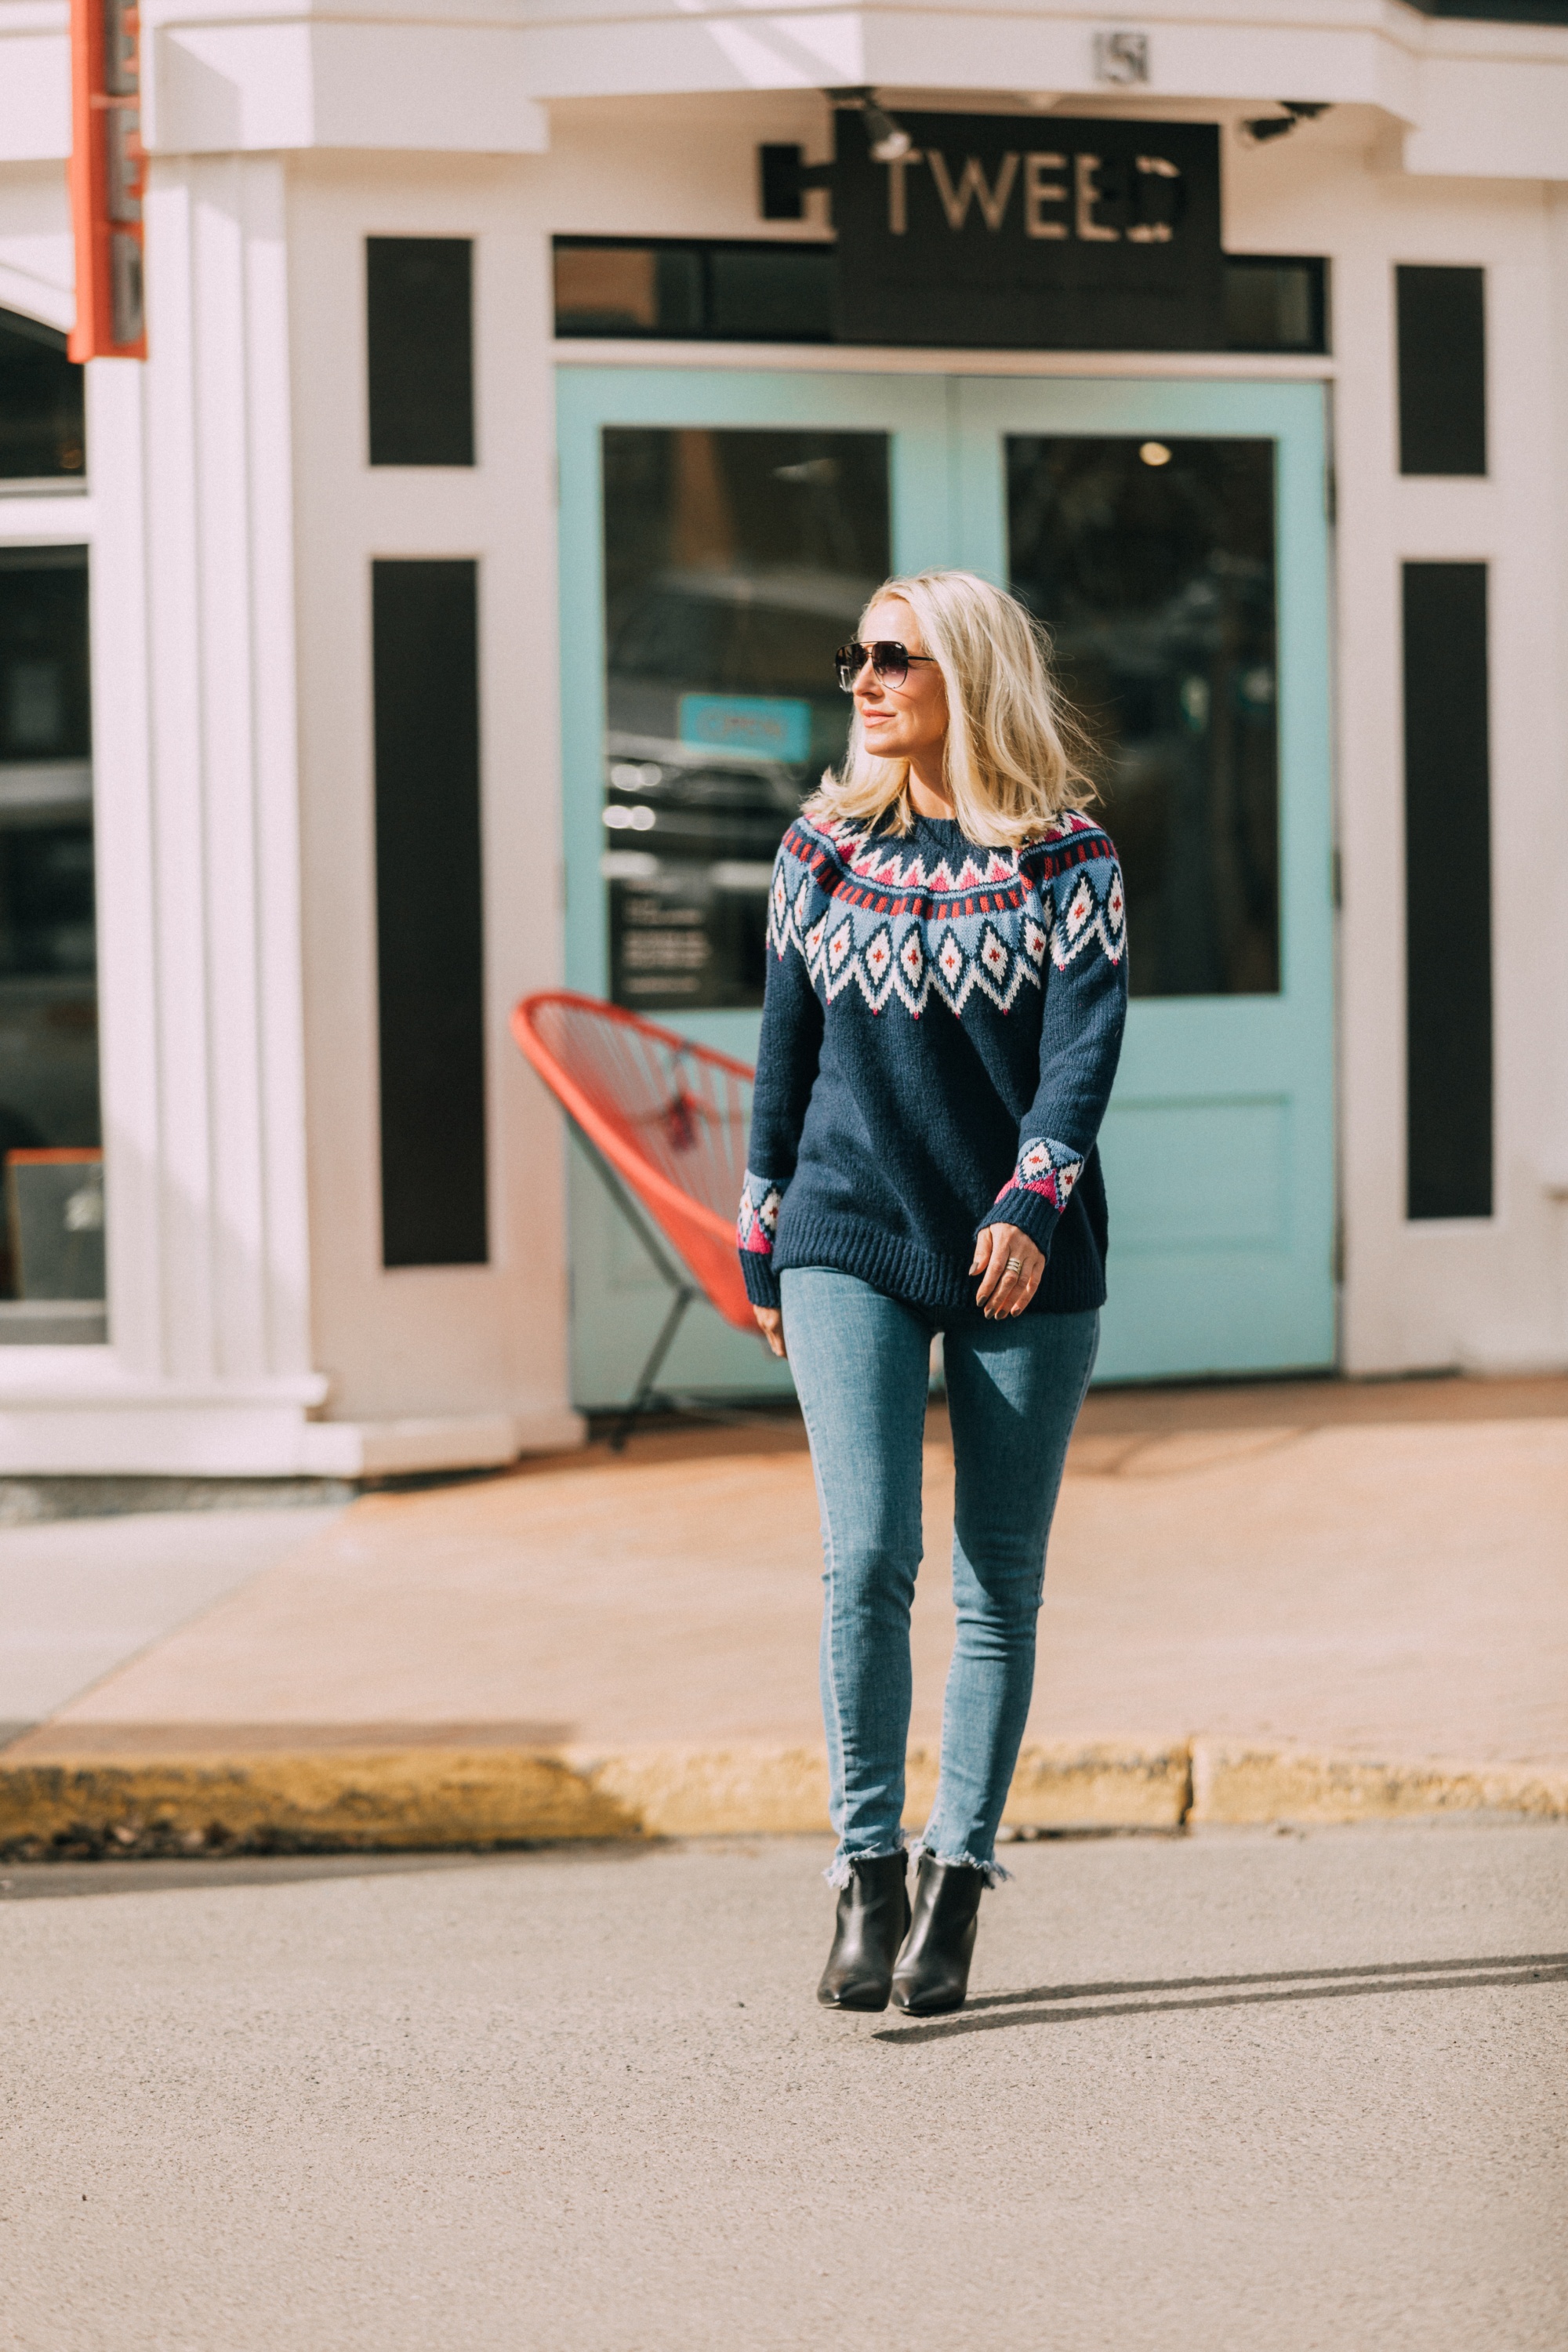 Affordable Sweaters, fashion blogger Erin Busbee of BusbeeStyle.com wearing a navy fair isle sweater, Levi's jeans, and black heeled booties from JCPenney in Telluride, C